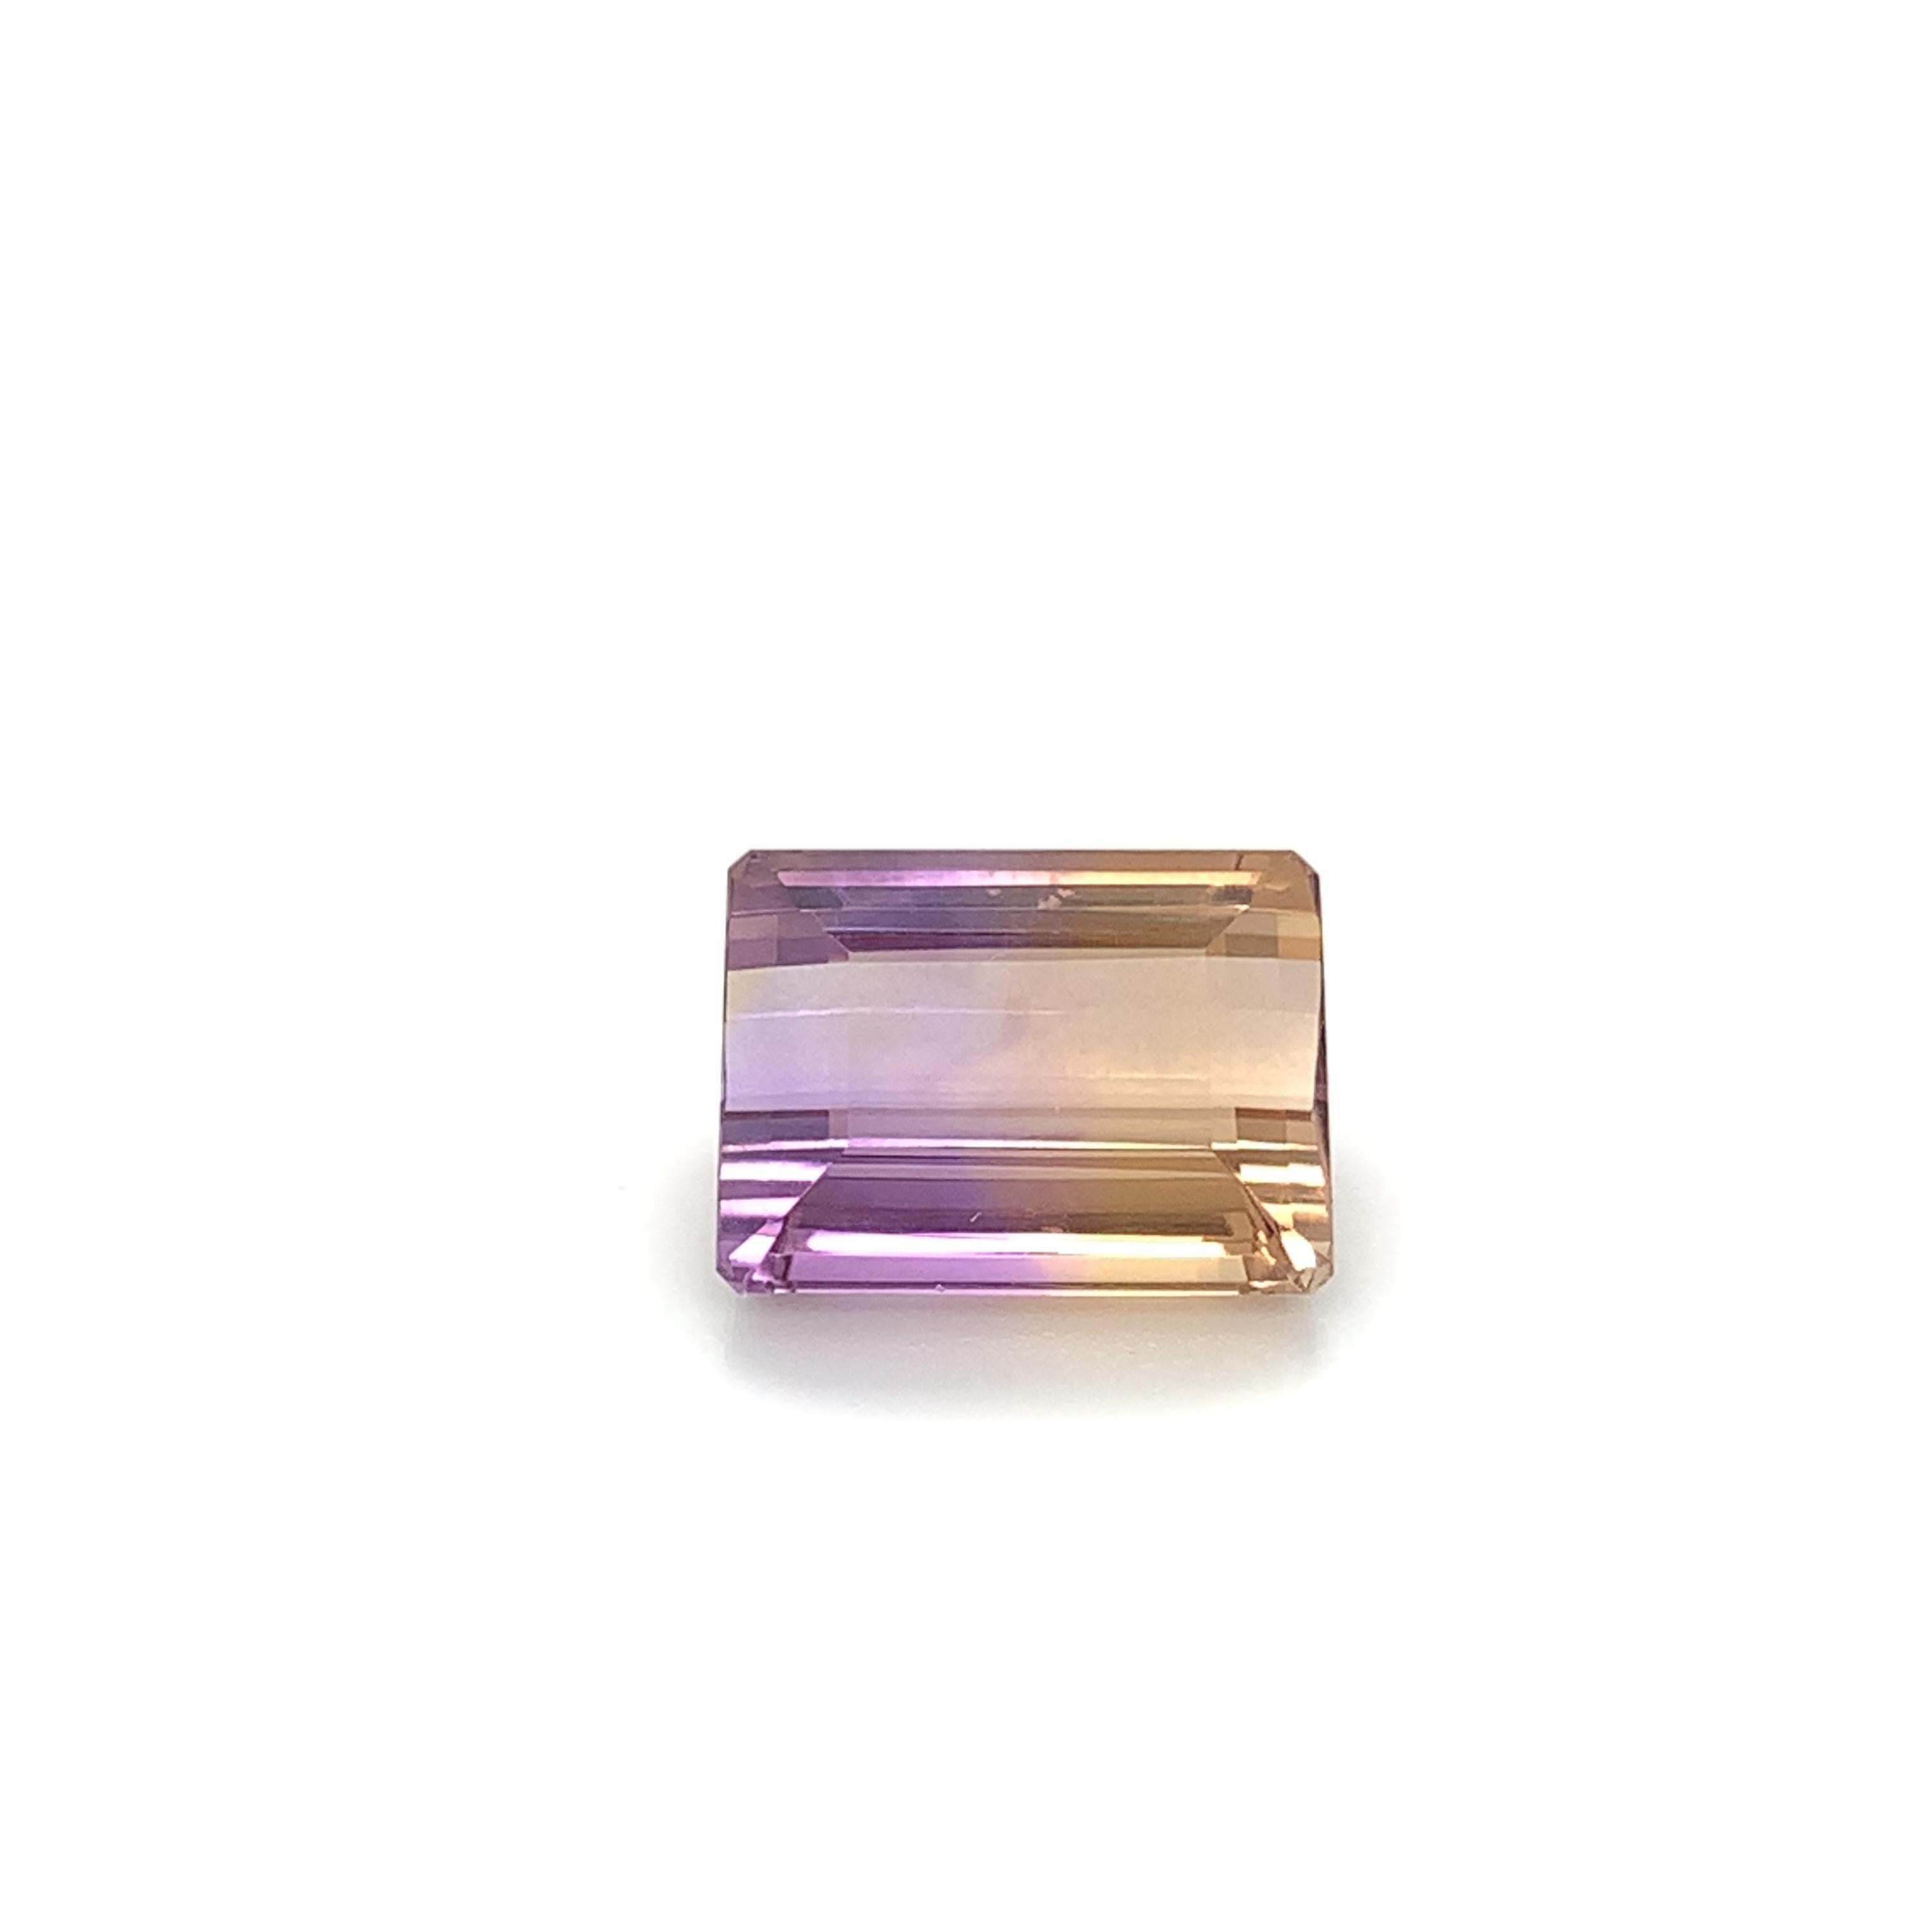 Laker and Vikiing fans will love this purple and gold ametrine, a gemstone with a combination of both bright amethyst and golden citrine! This 15.64 carat emerald-cut ametrine has a nearly 50-50 distribution of bright purple and gold. No need to